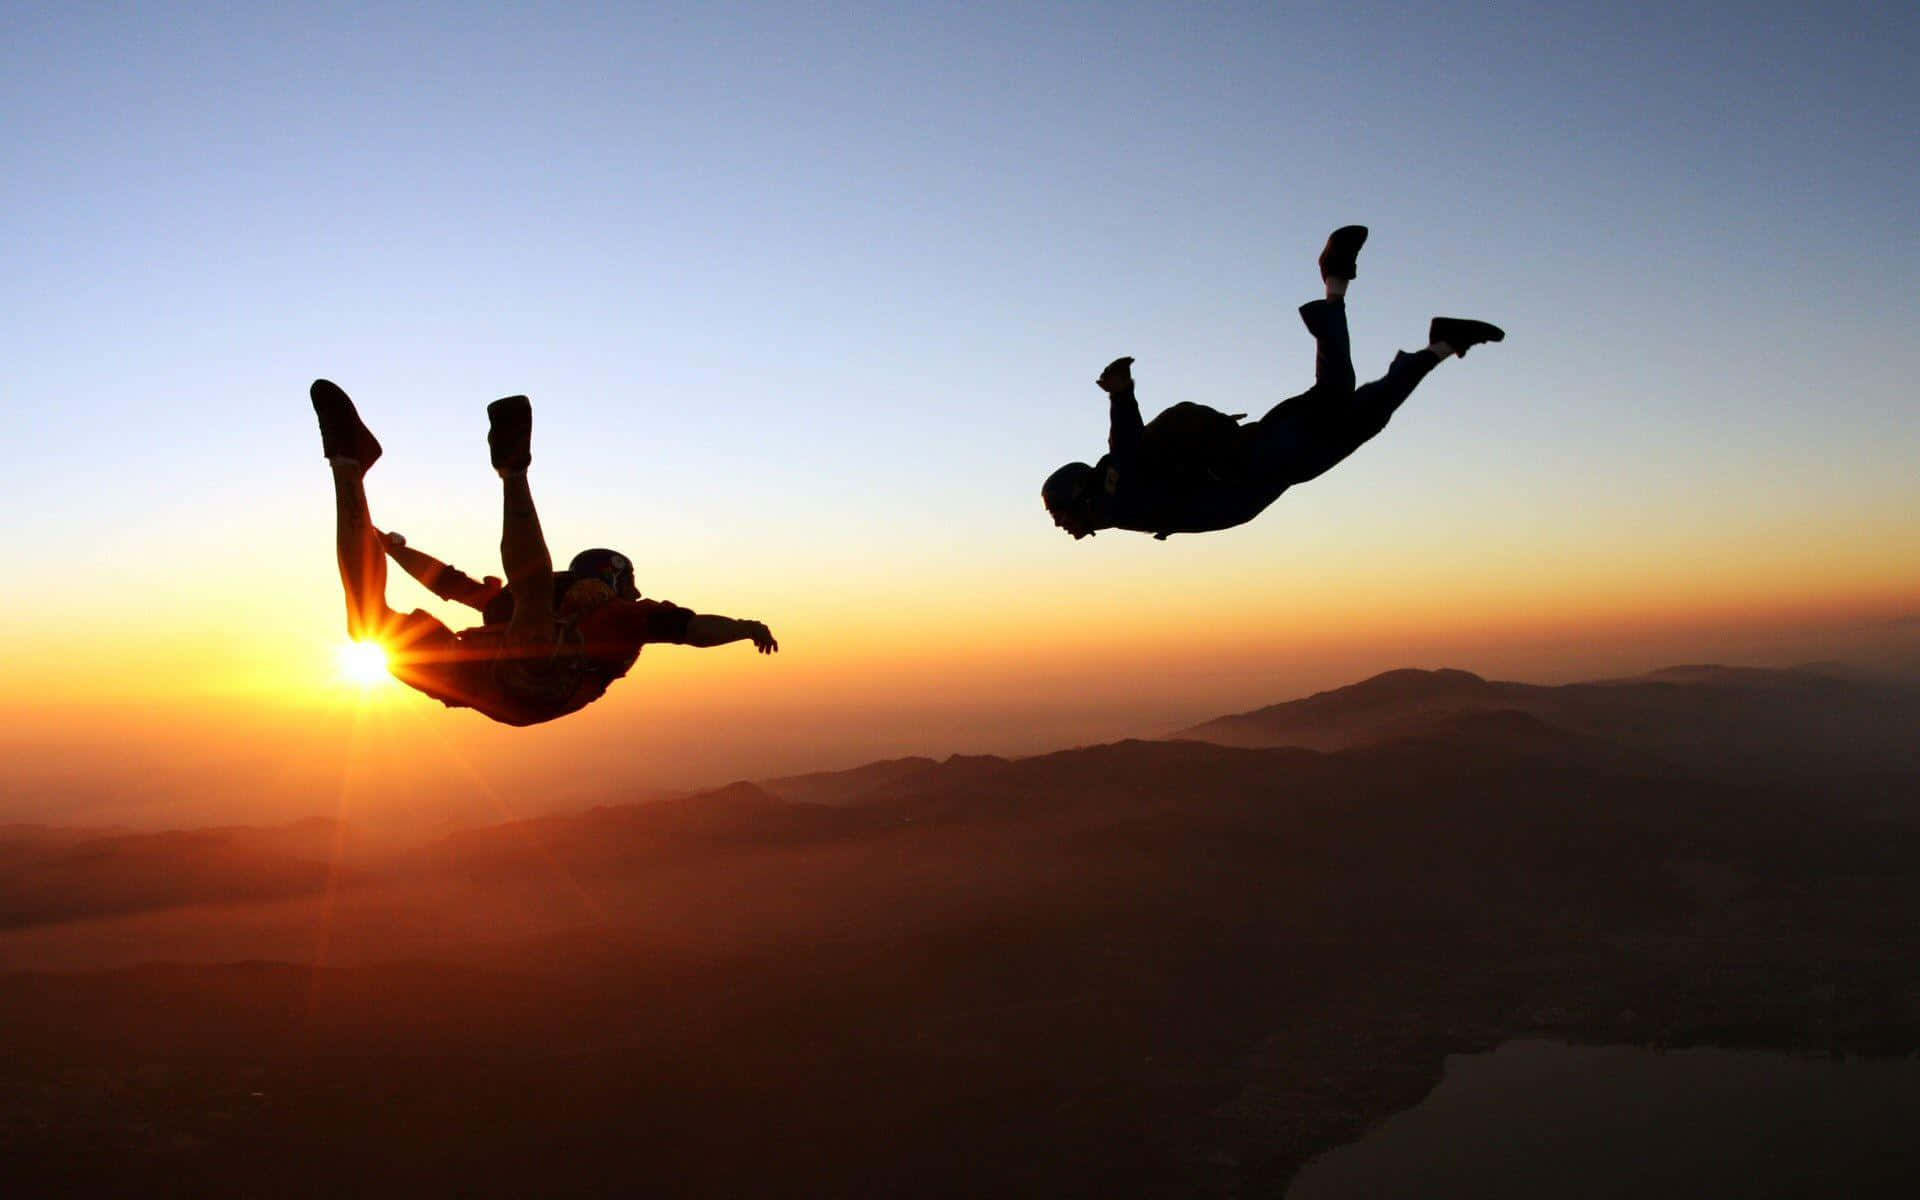 Take the leap with sky diving!